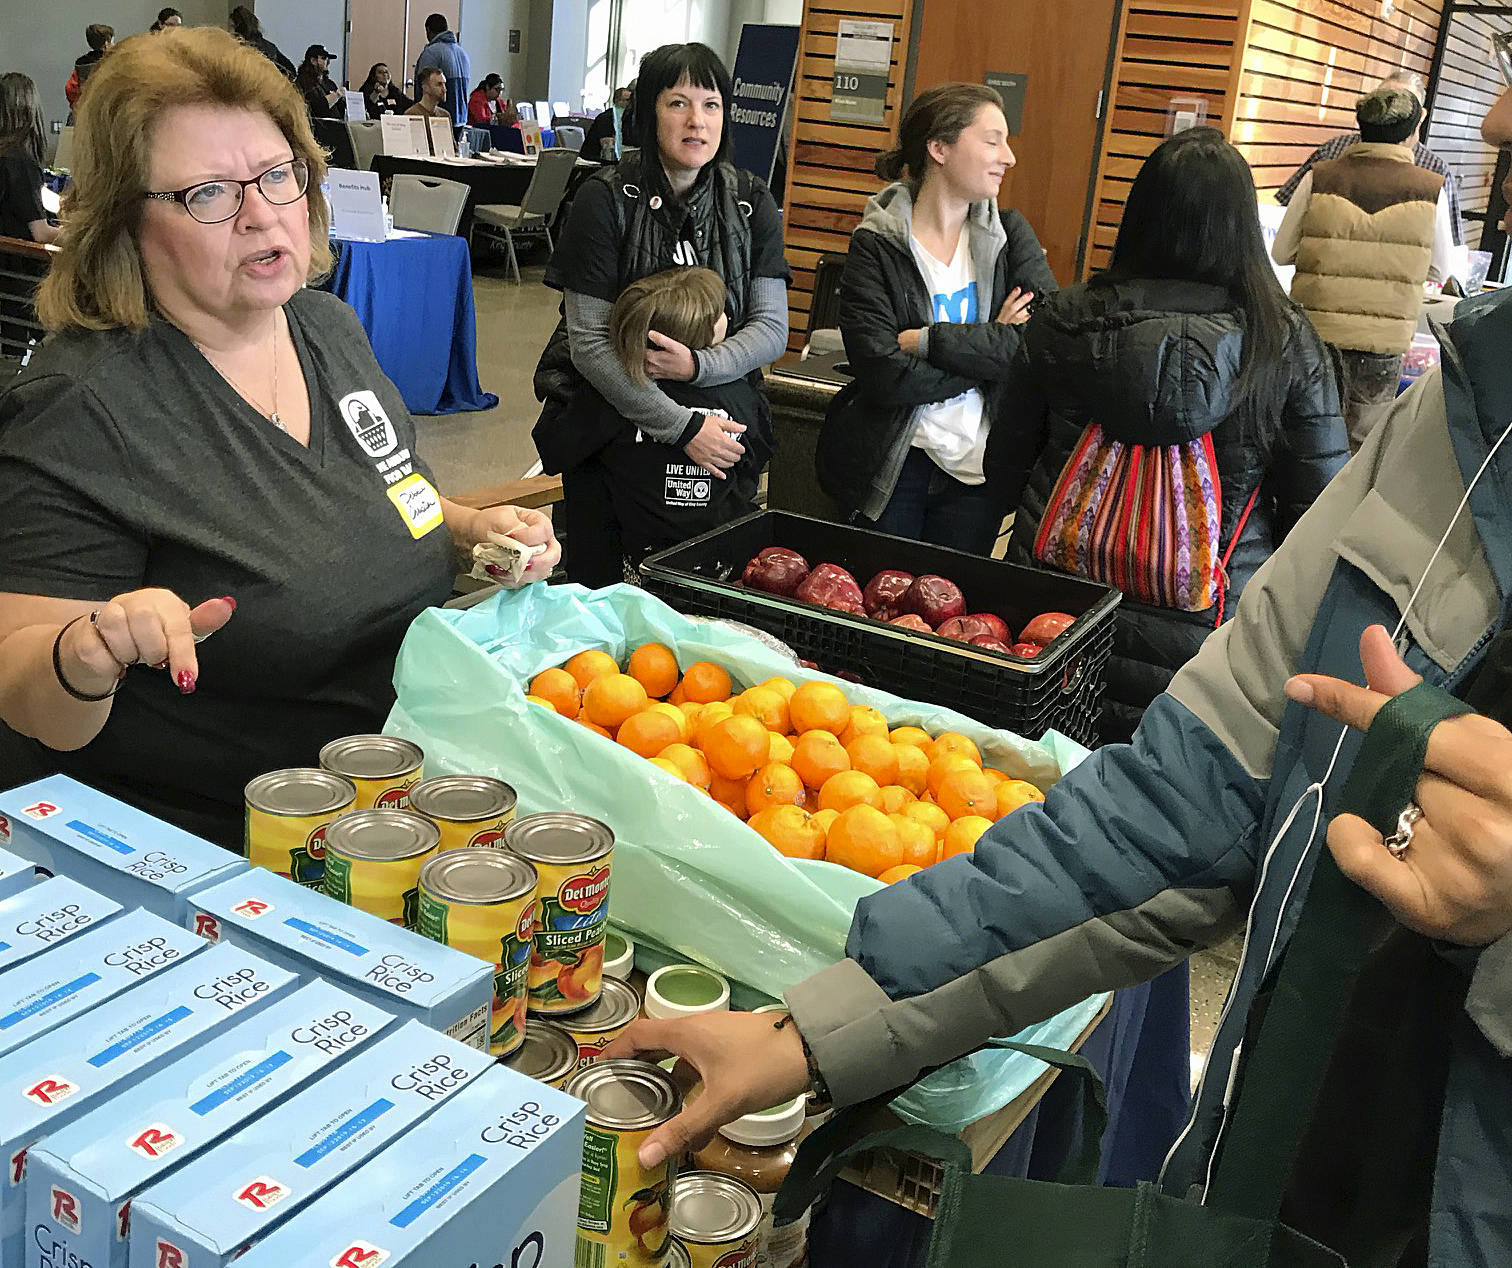 Debbie Christian, executive director of the Auburn Food Bank, distributes fruit and other offerings to families during the United Way of King County’s Family Resource Exchange at Green River College last Saturday.